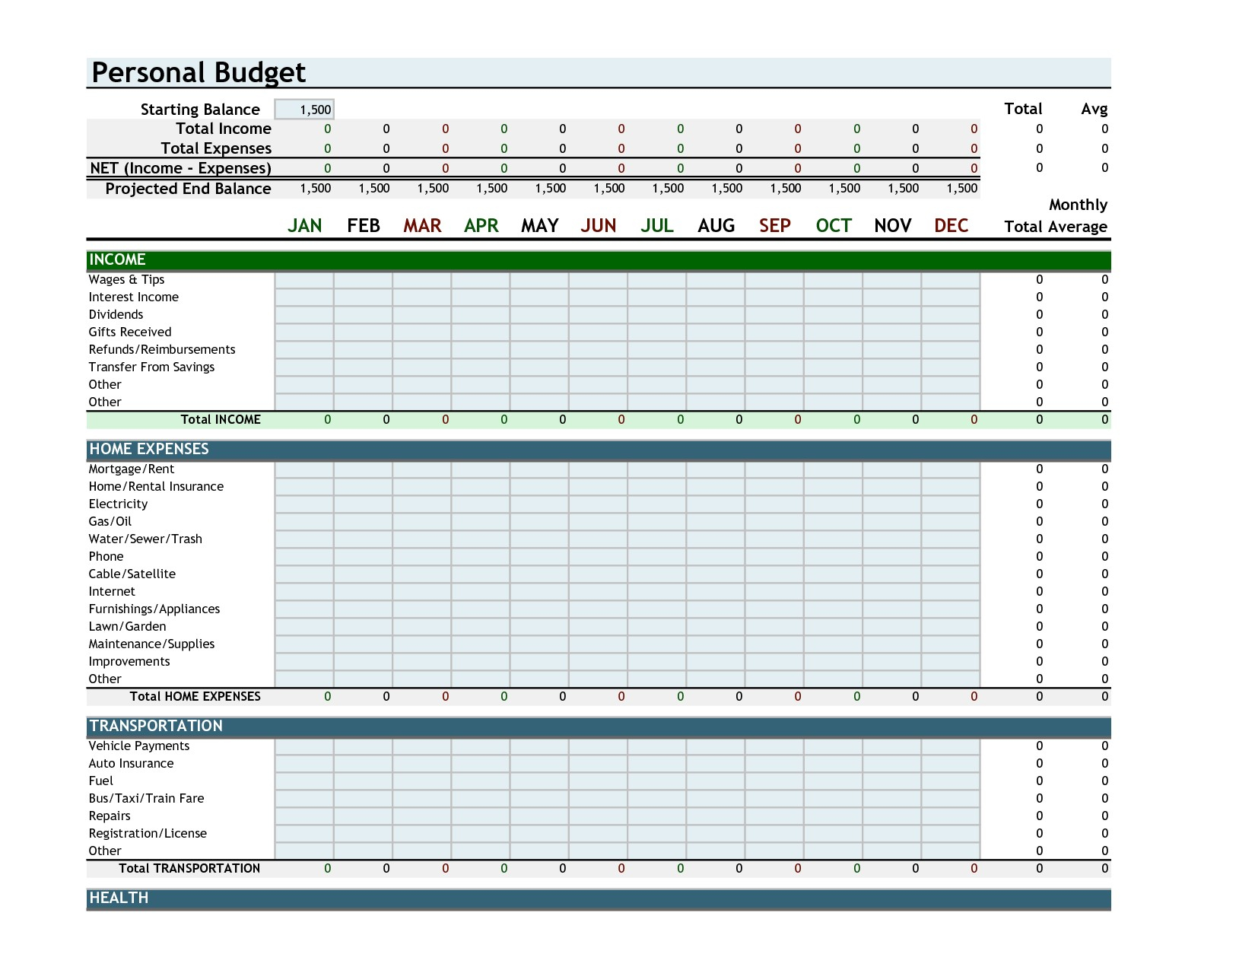 5 year personal budget plan template